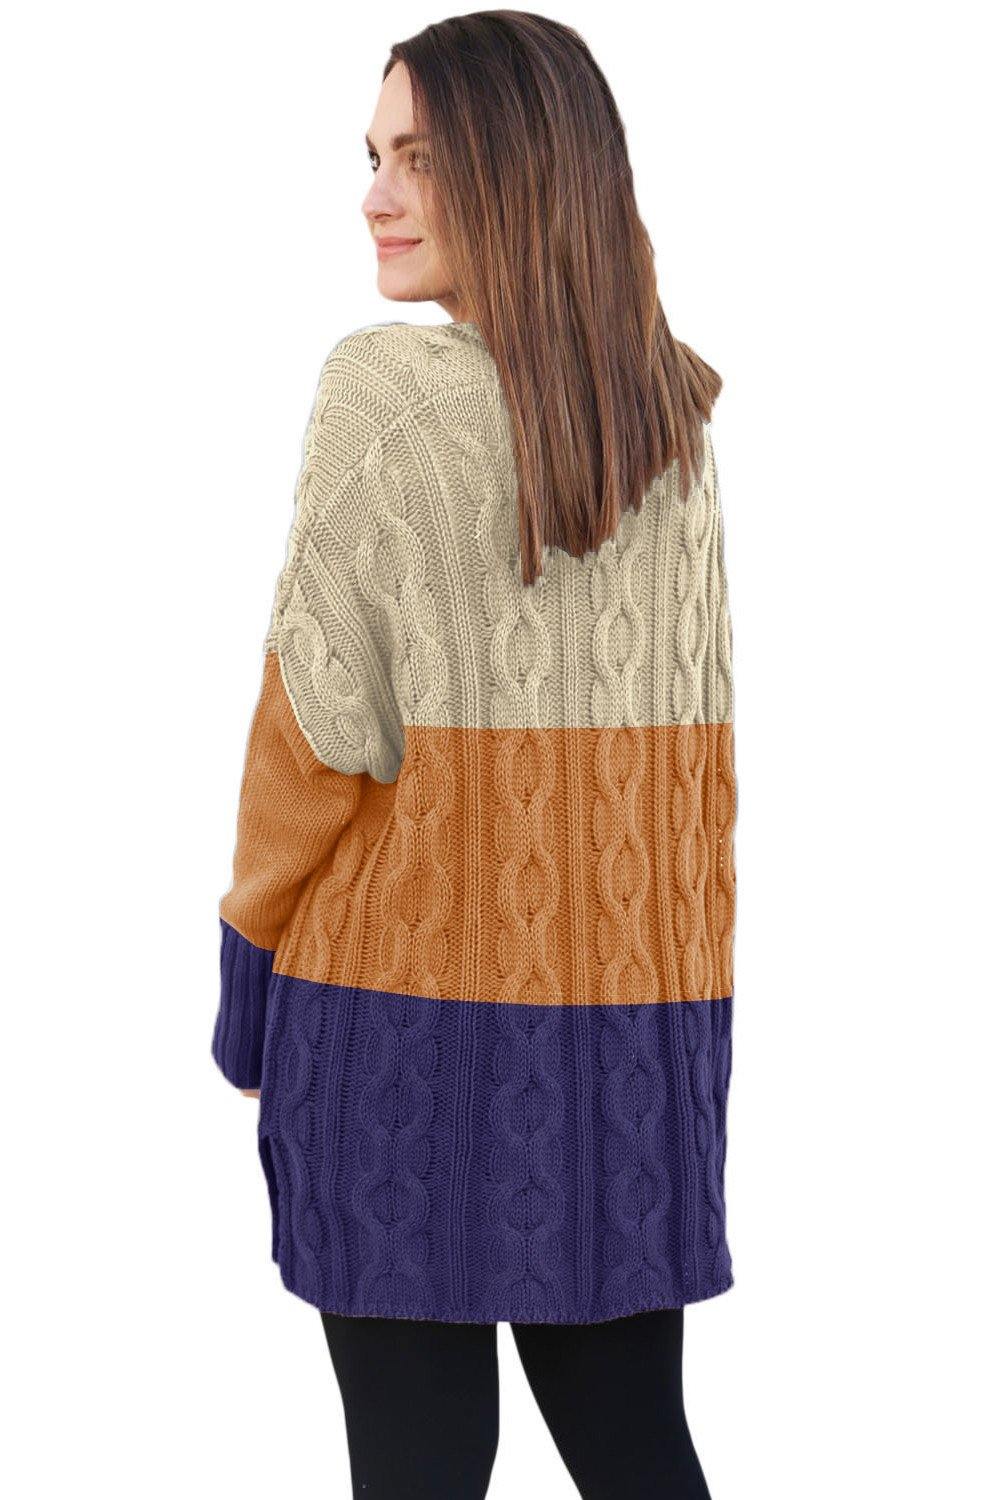 Colorblock Cable Knit Sweater with Slits - L & M Kee, LLC